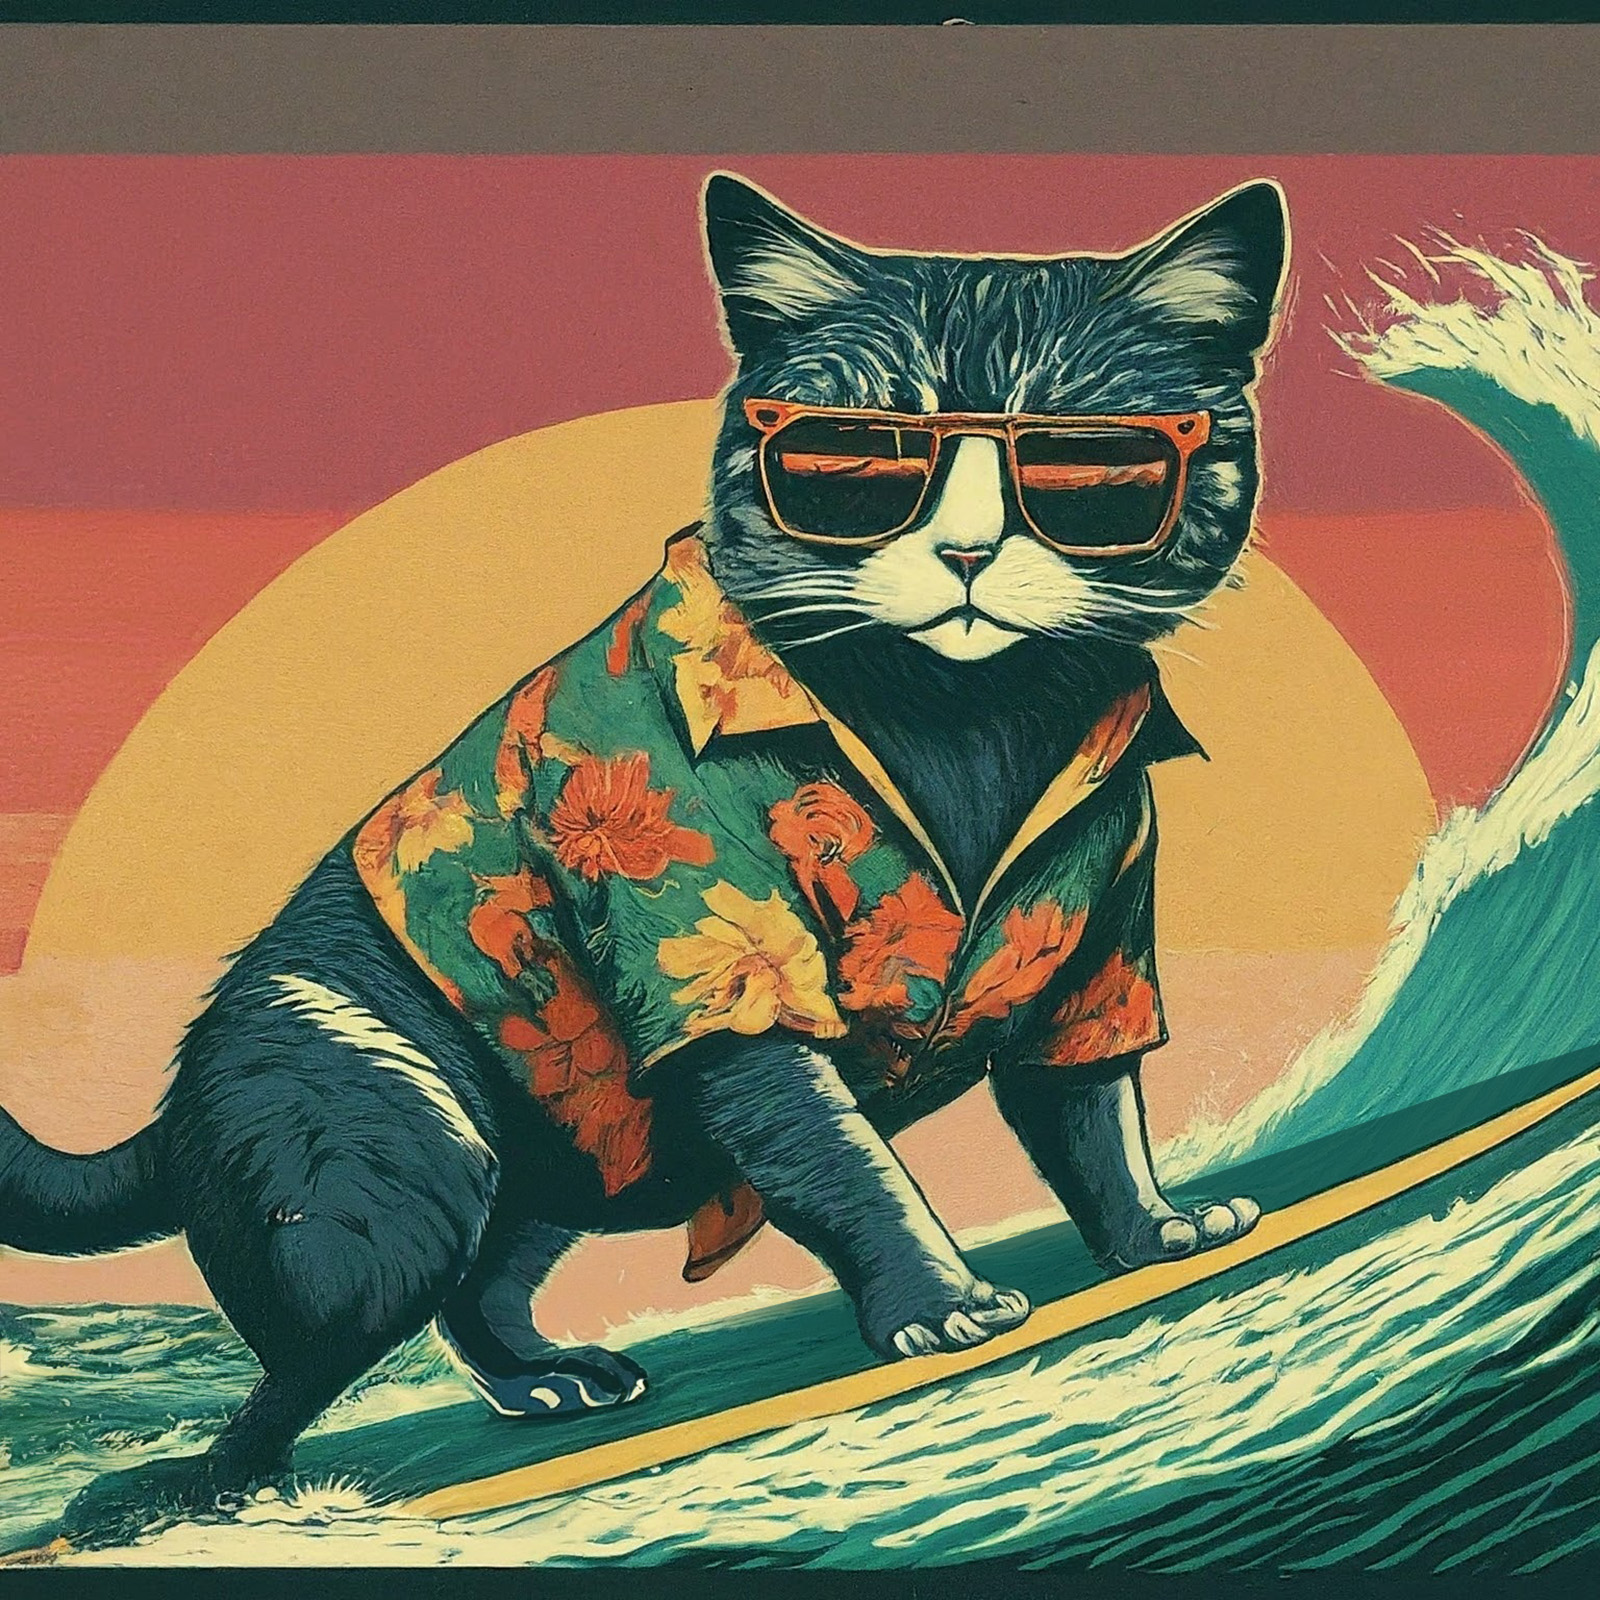 A Surfing Cat Confidently Rides A Surfboard, Sporting Sunglasses And A Stylish Shirt.